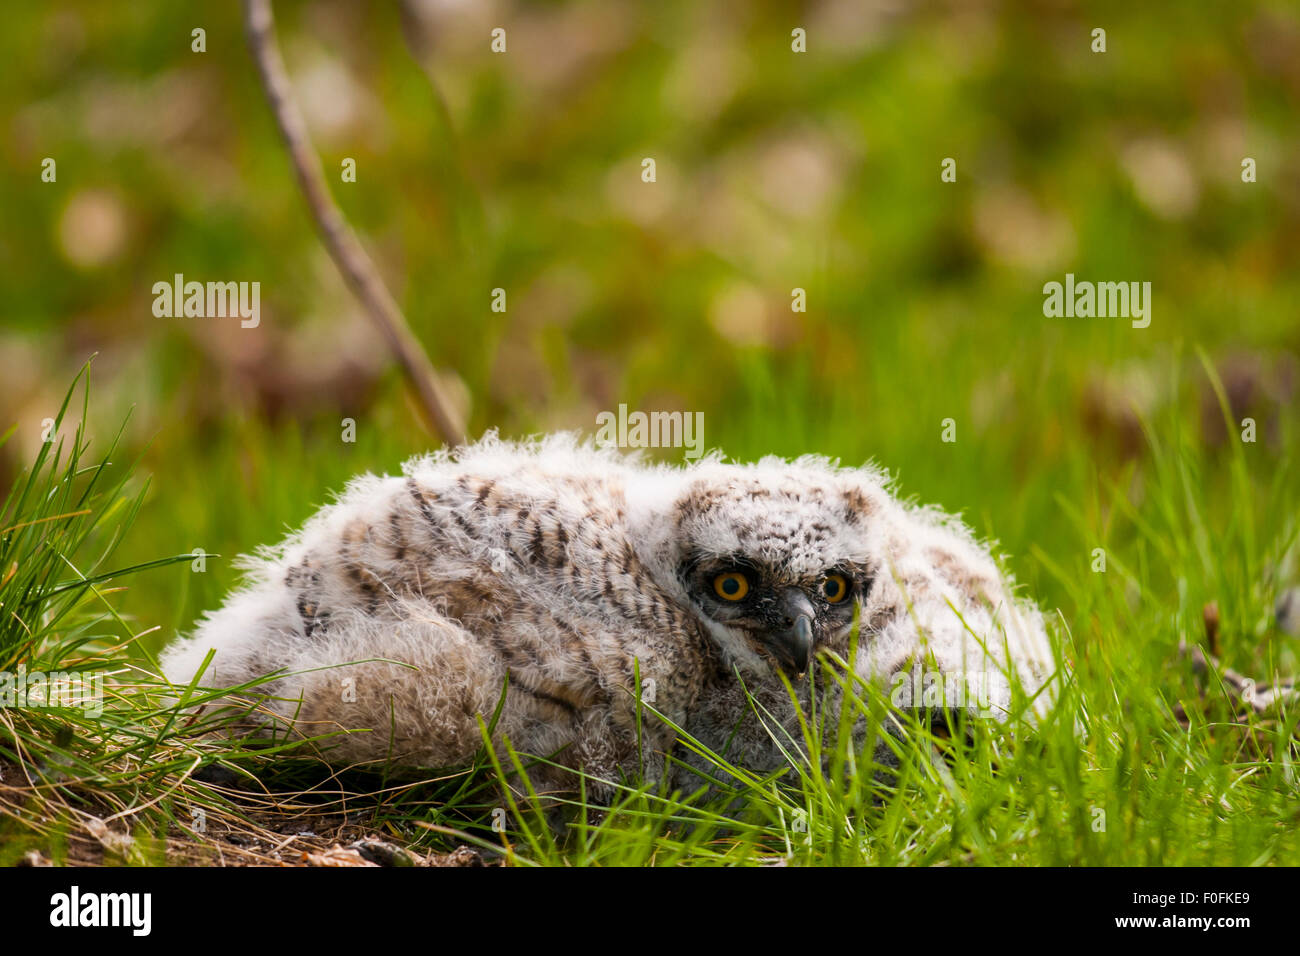 Wild Great Horned Owlet laying helpless on the ground after falling out of the nest Stock Photo